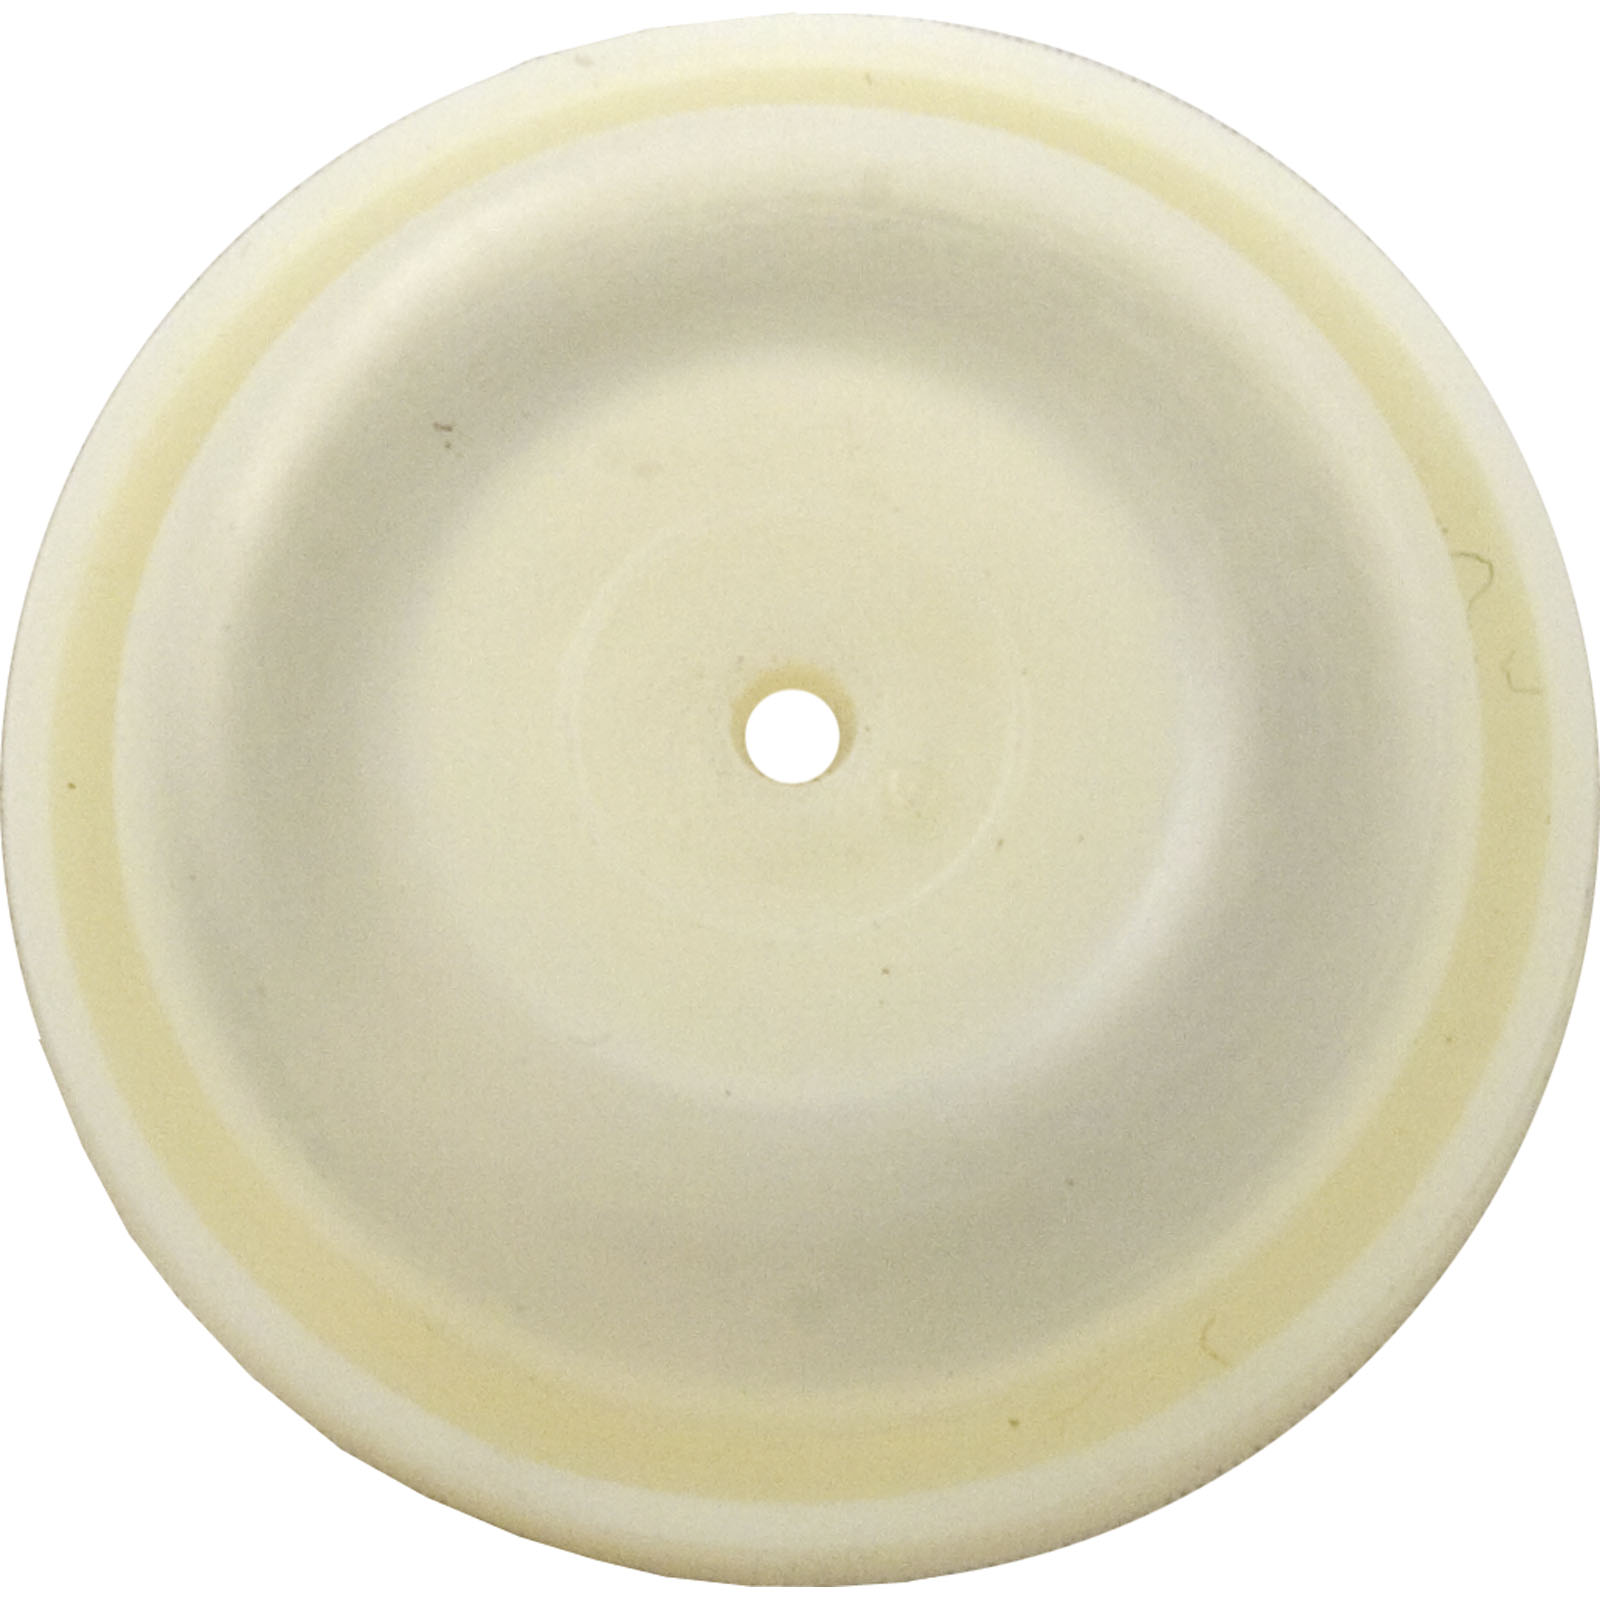 Picture of 6-05-0048 Air Pump Diaphragm Spa Butler/D-1 (Apollo) (4 required)